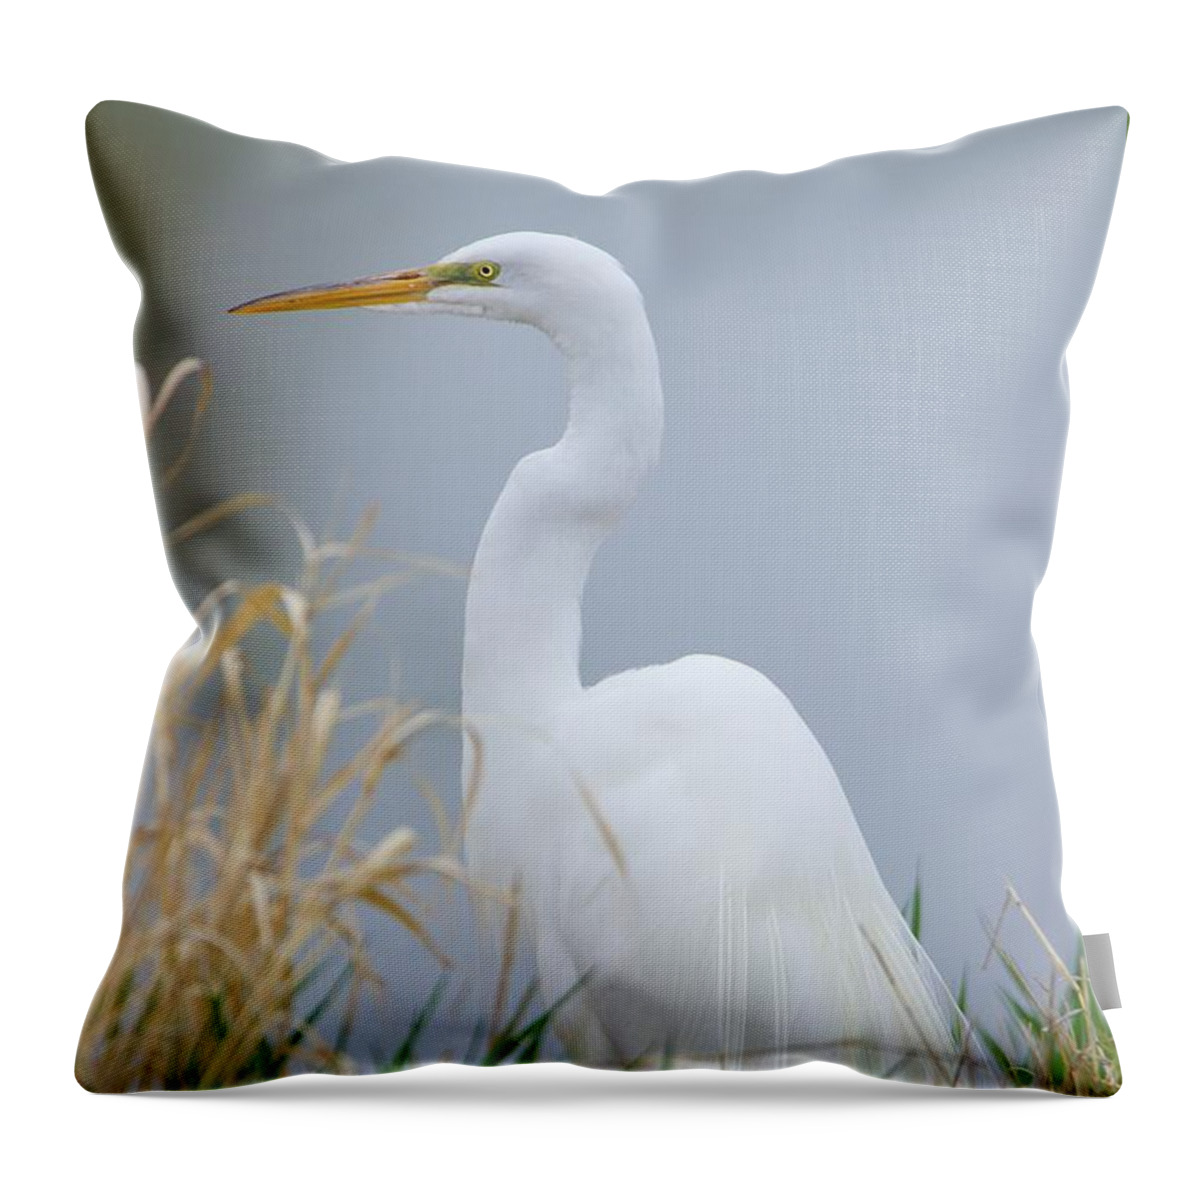 Egret Throw Pillow featuring the photograph Luminous Egret by Yvonne M Smith